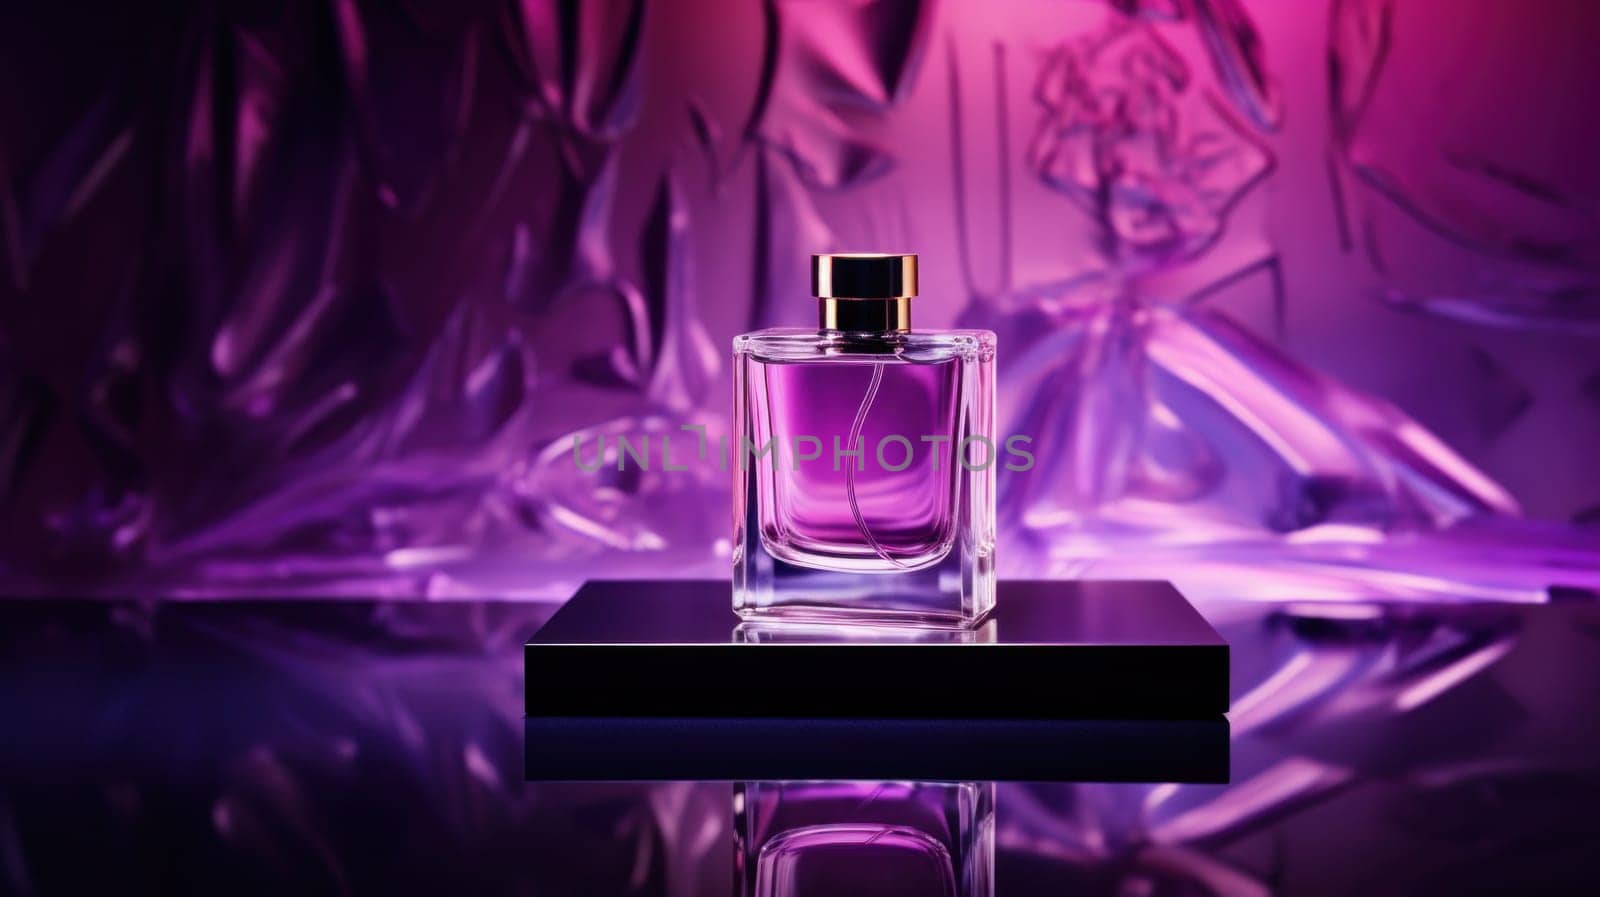 A perfume bottle on a black stand in front of purple background, AI by starush